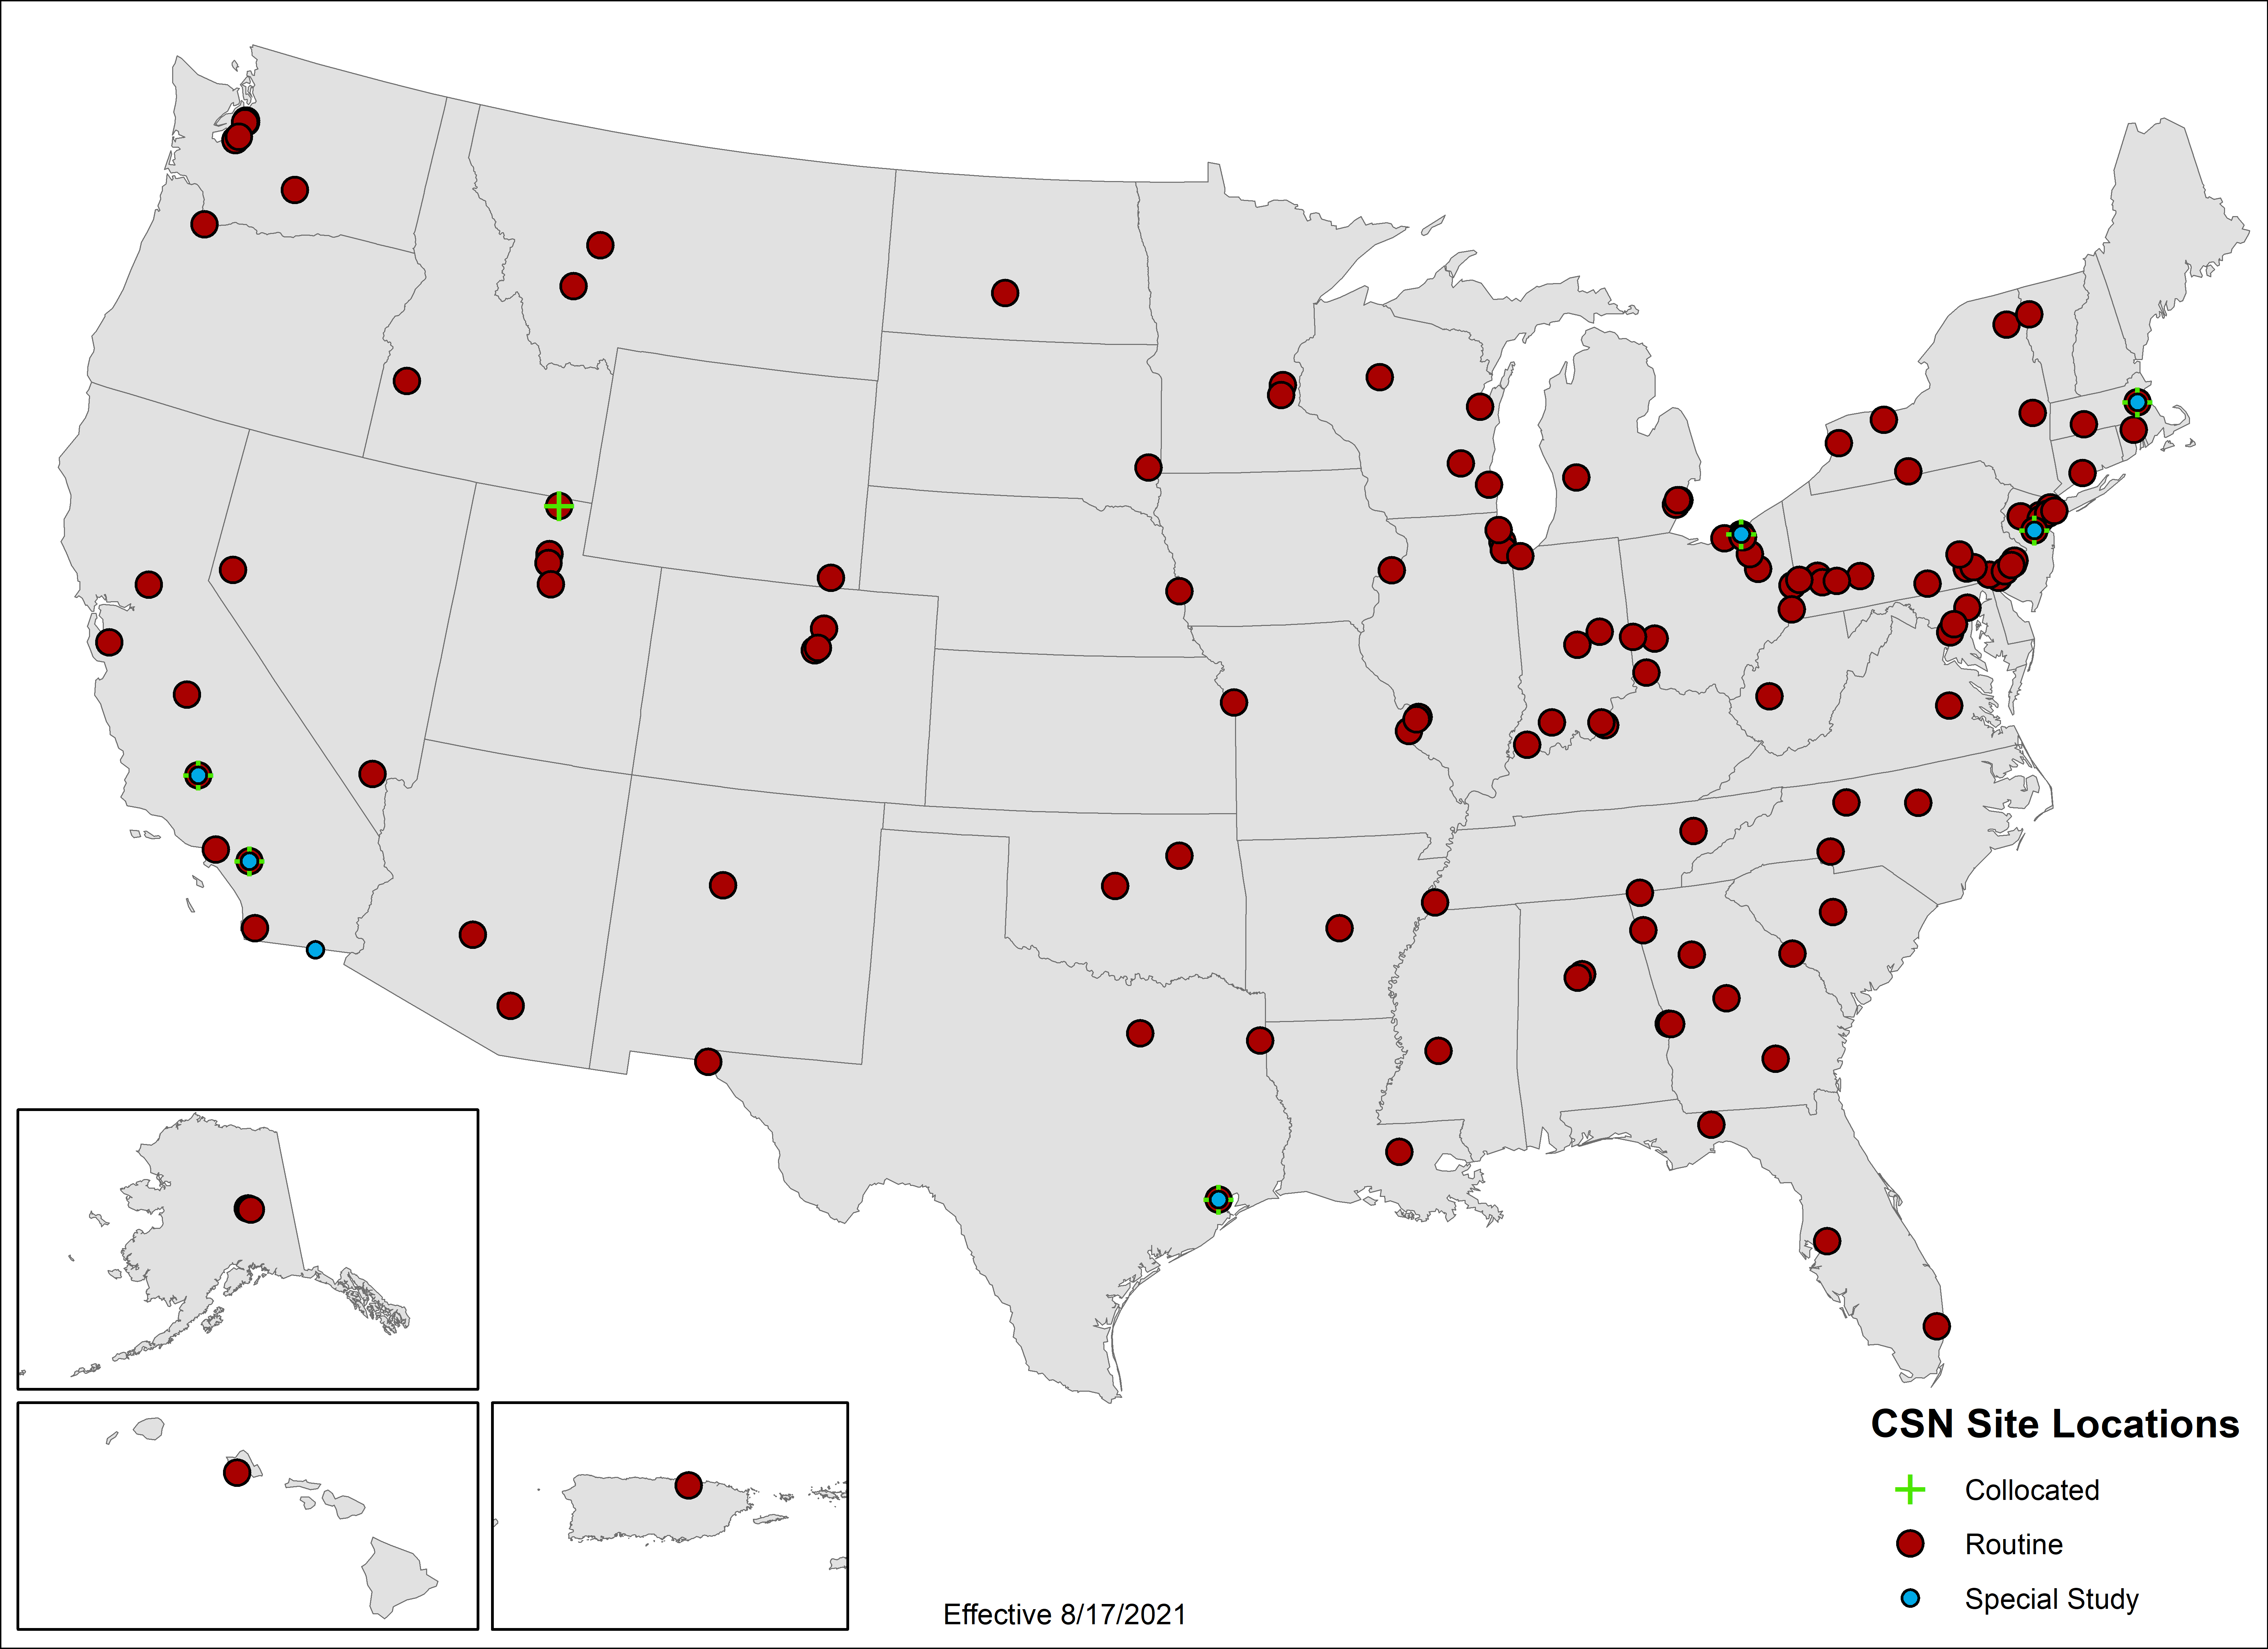 Image: map of CSN site locations across the United States.